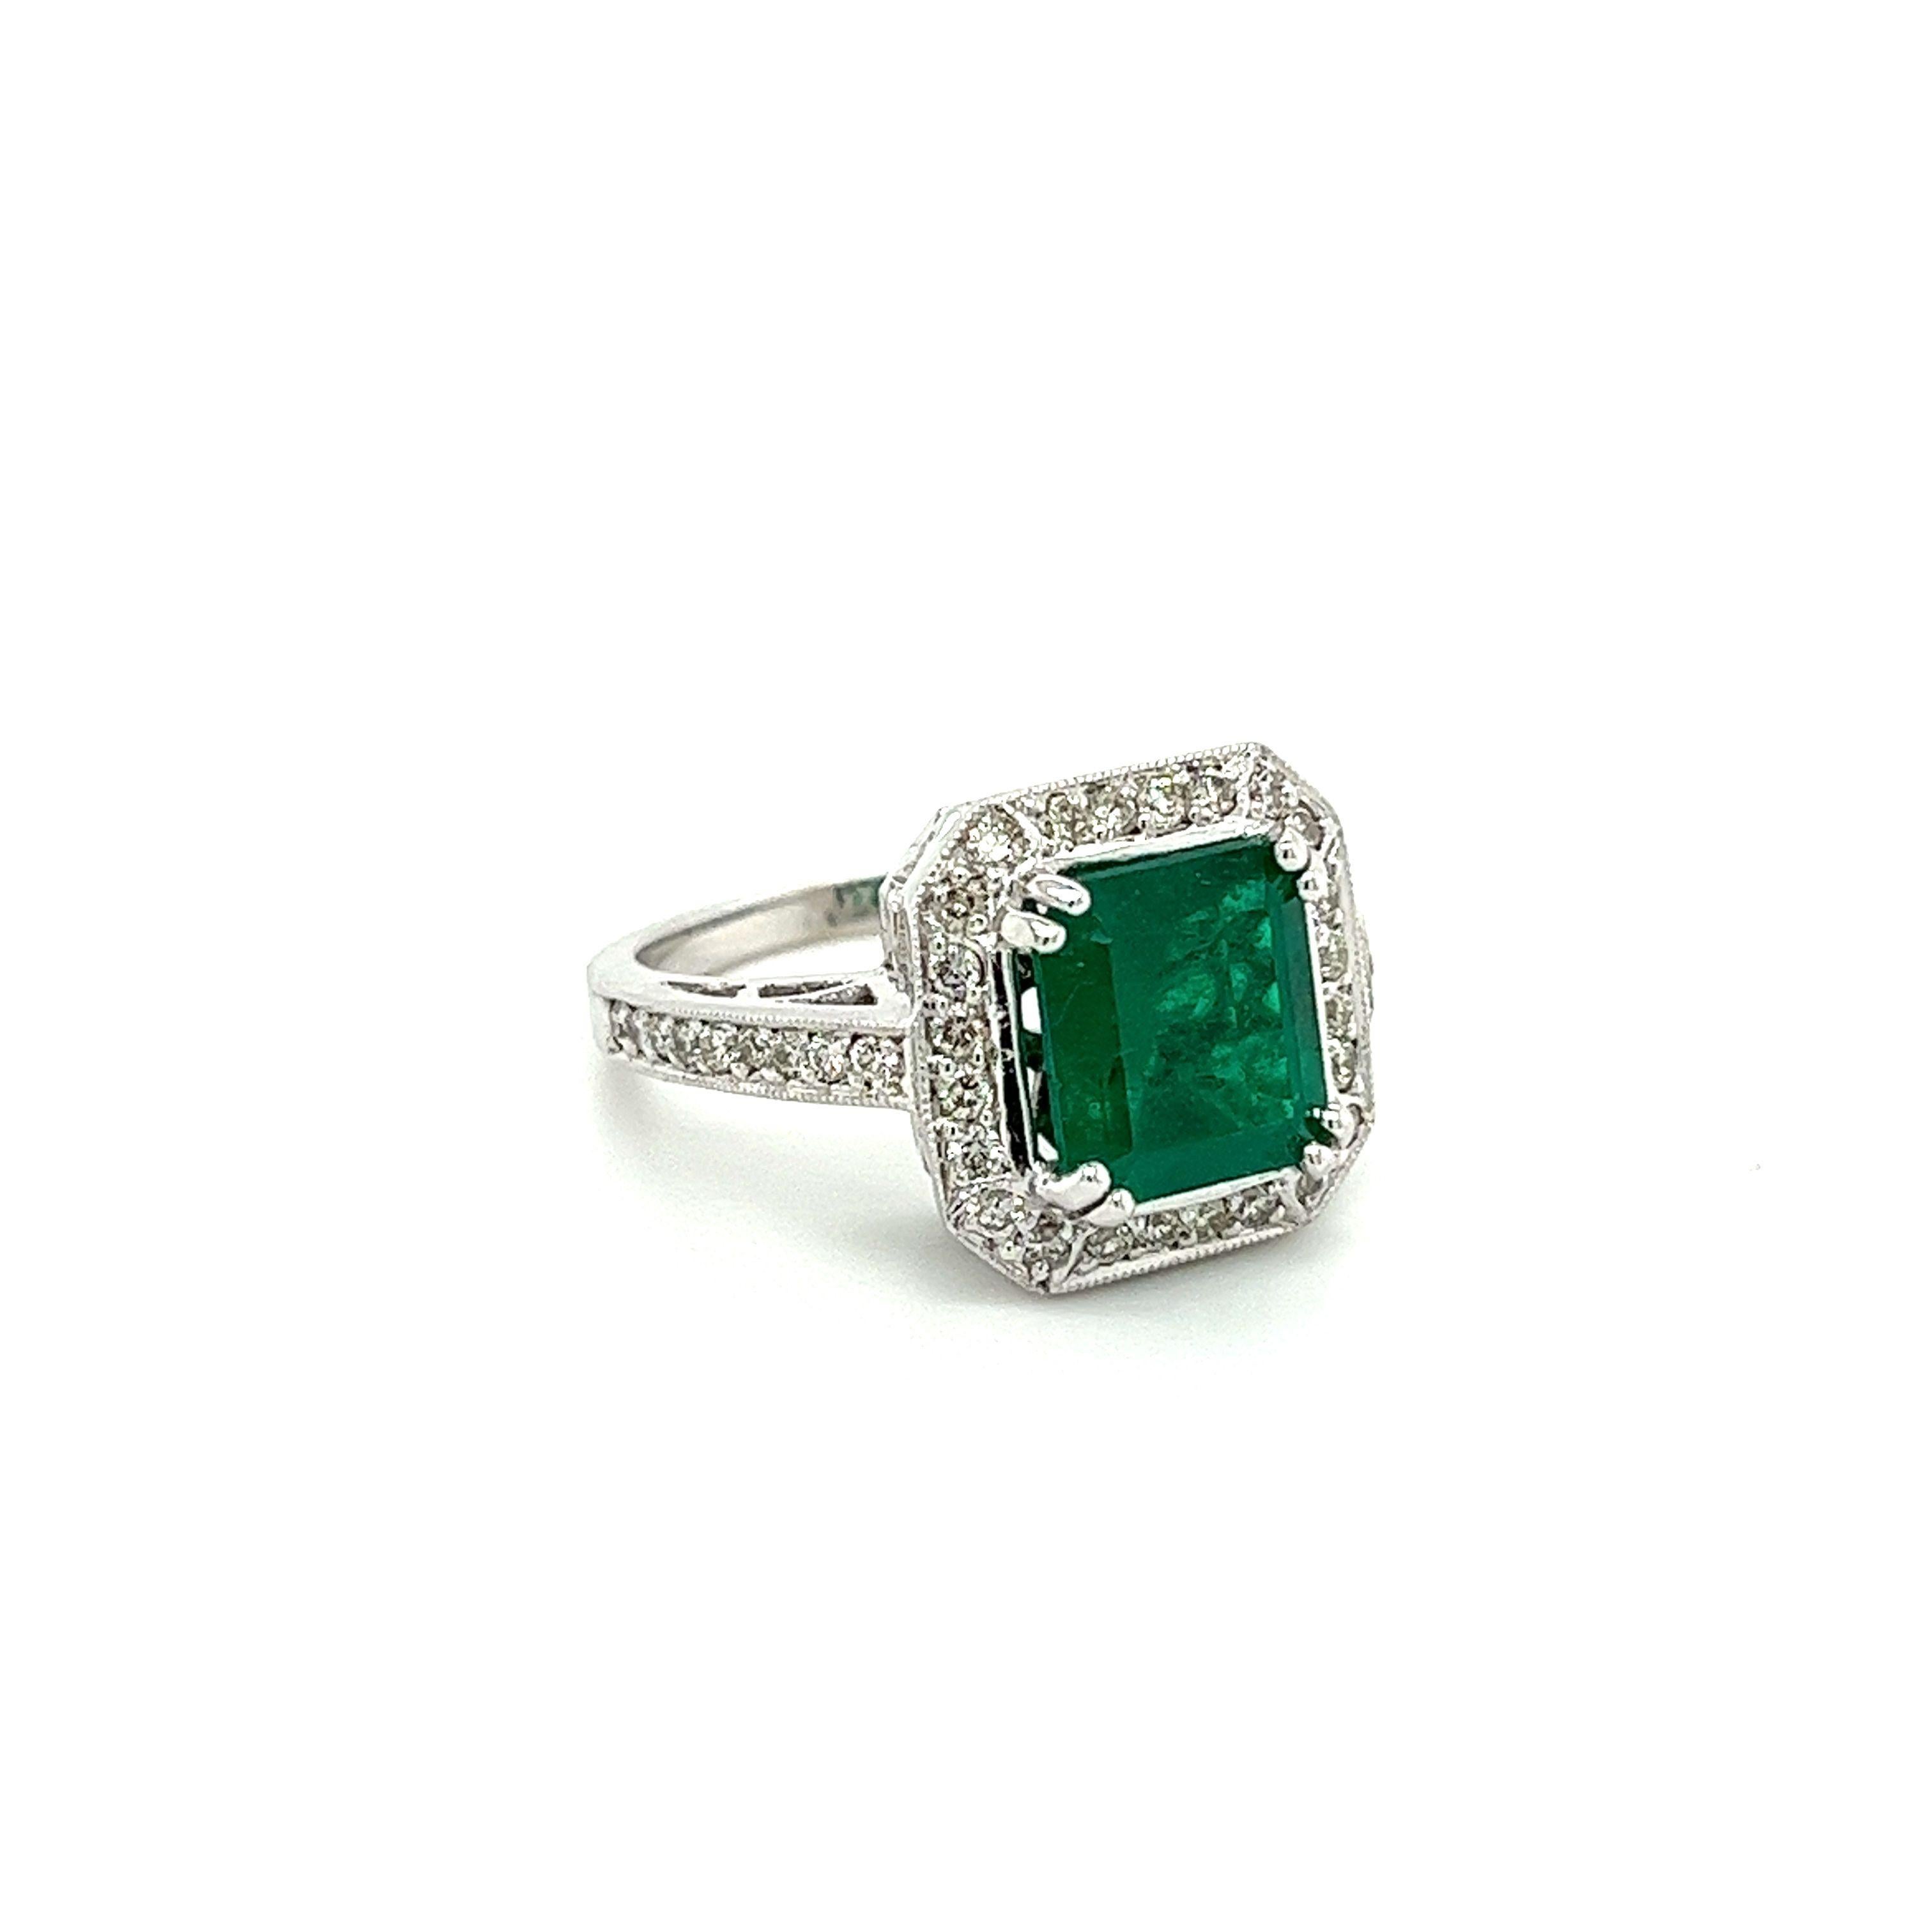 Emerald Cut 3 Carat Colombian Emerald in 18K White Gold Ring & Round Cut Diamond Halo For Sale